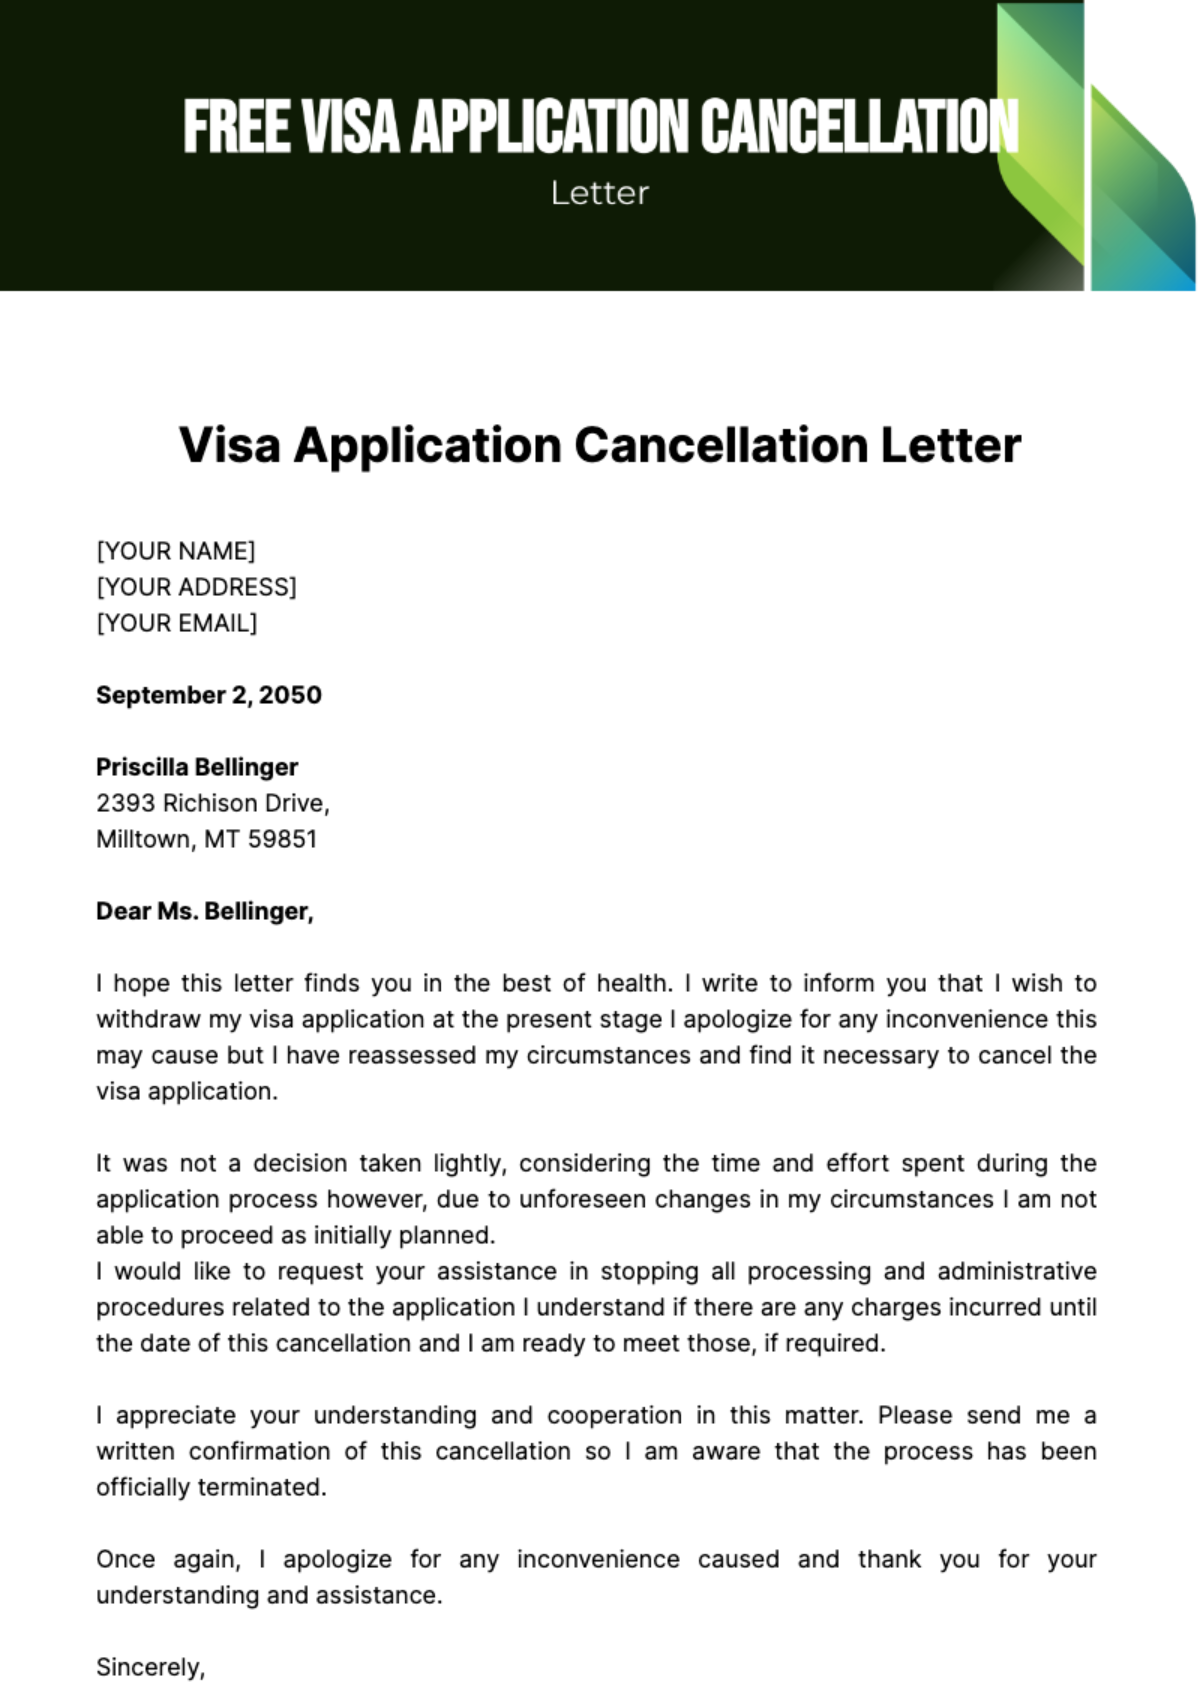 Free Visa Application Cancellation Letter Template